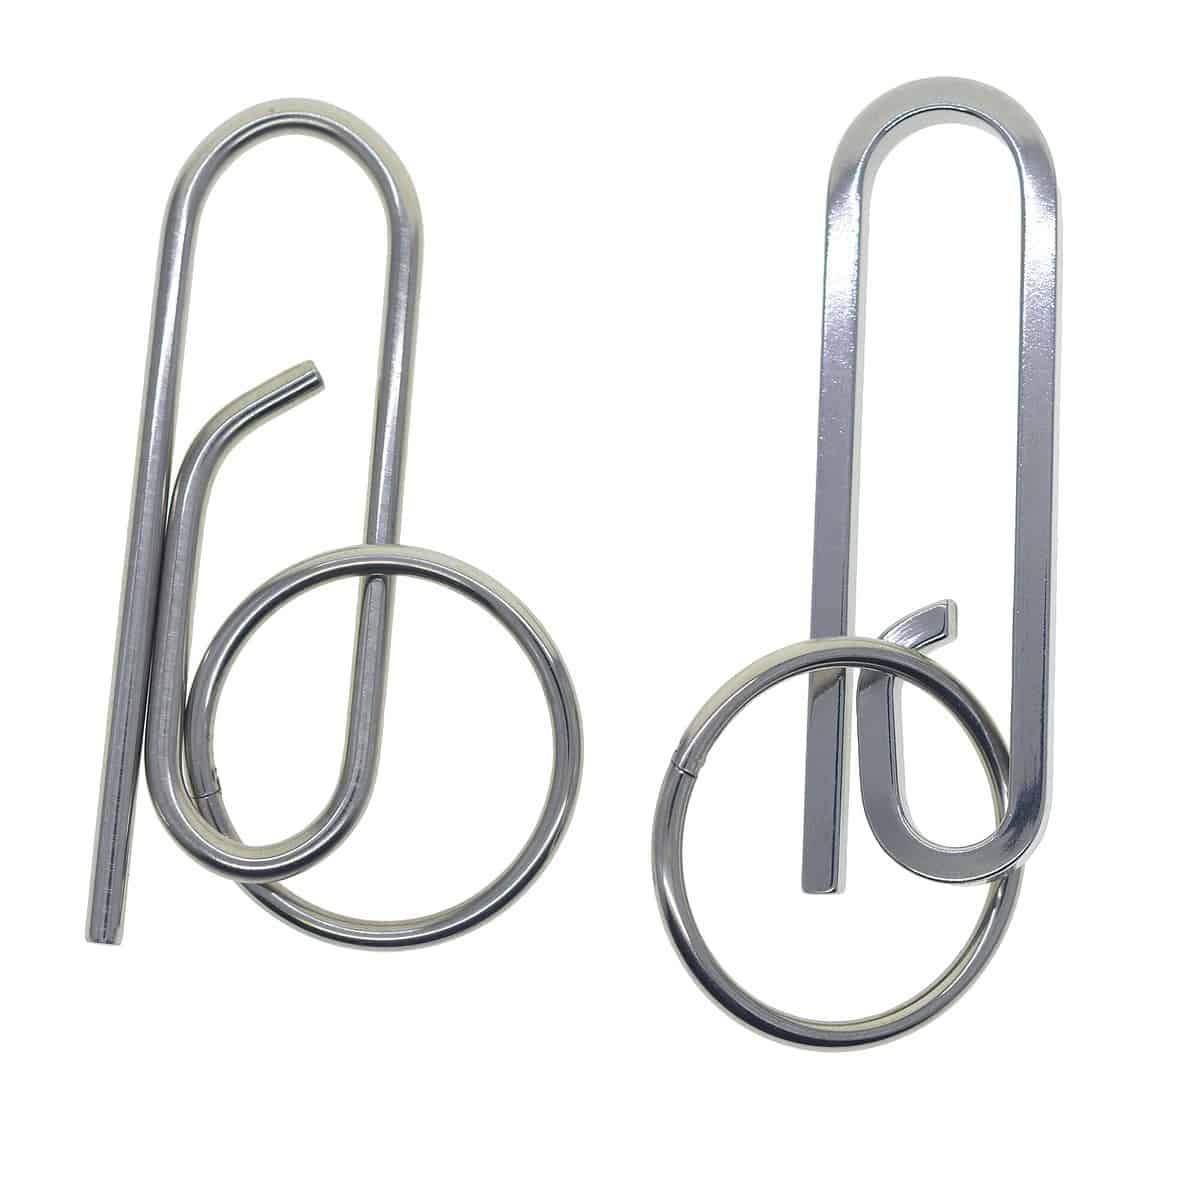 2022 Unique creative Fine biker 304 stainless steel wire wrap Oval paper clip U hook Carabiner Key ring Clasp Tool Keychain DIY